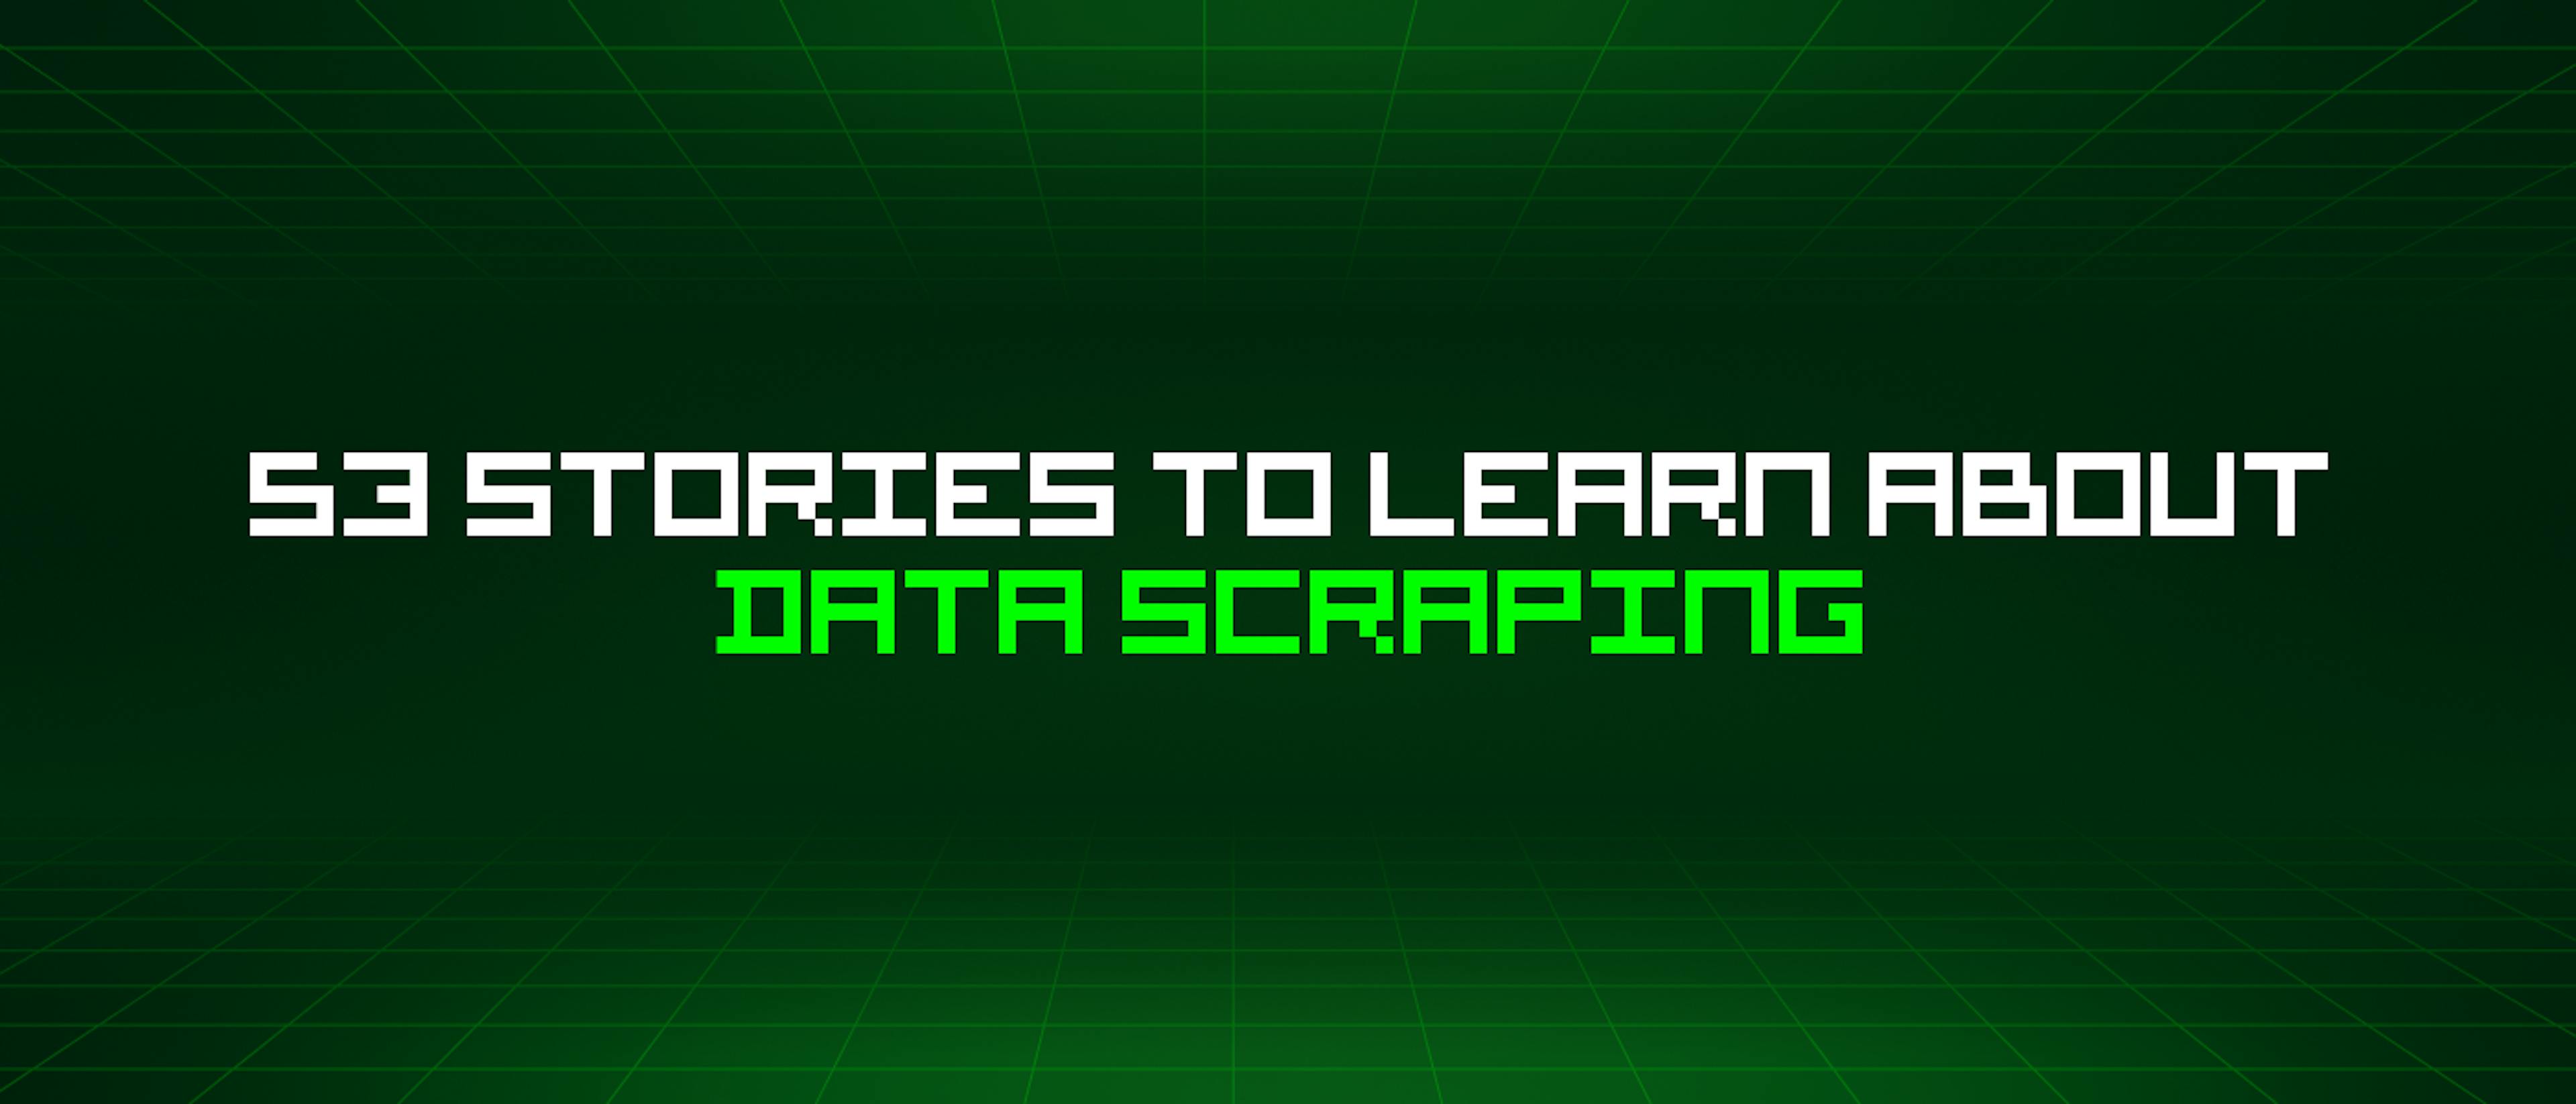 featured image - 53 Stories To Learn About Data Scraping